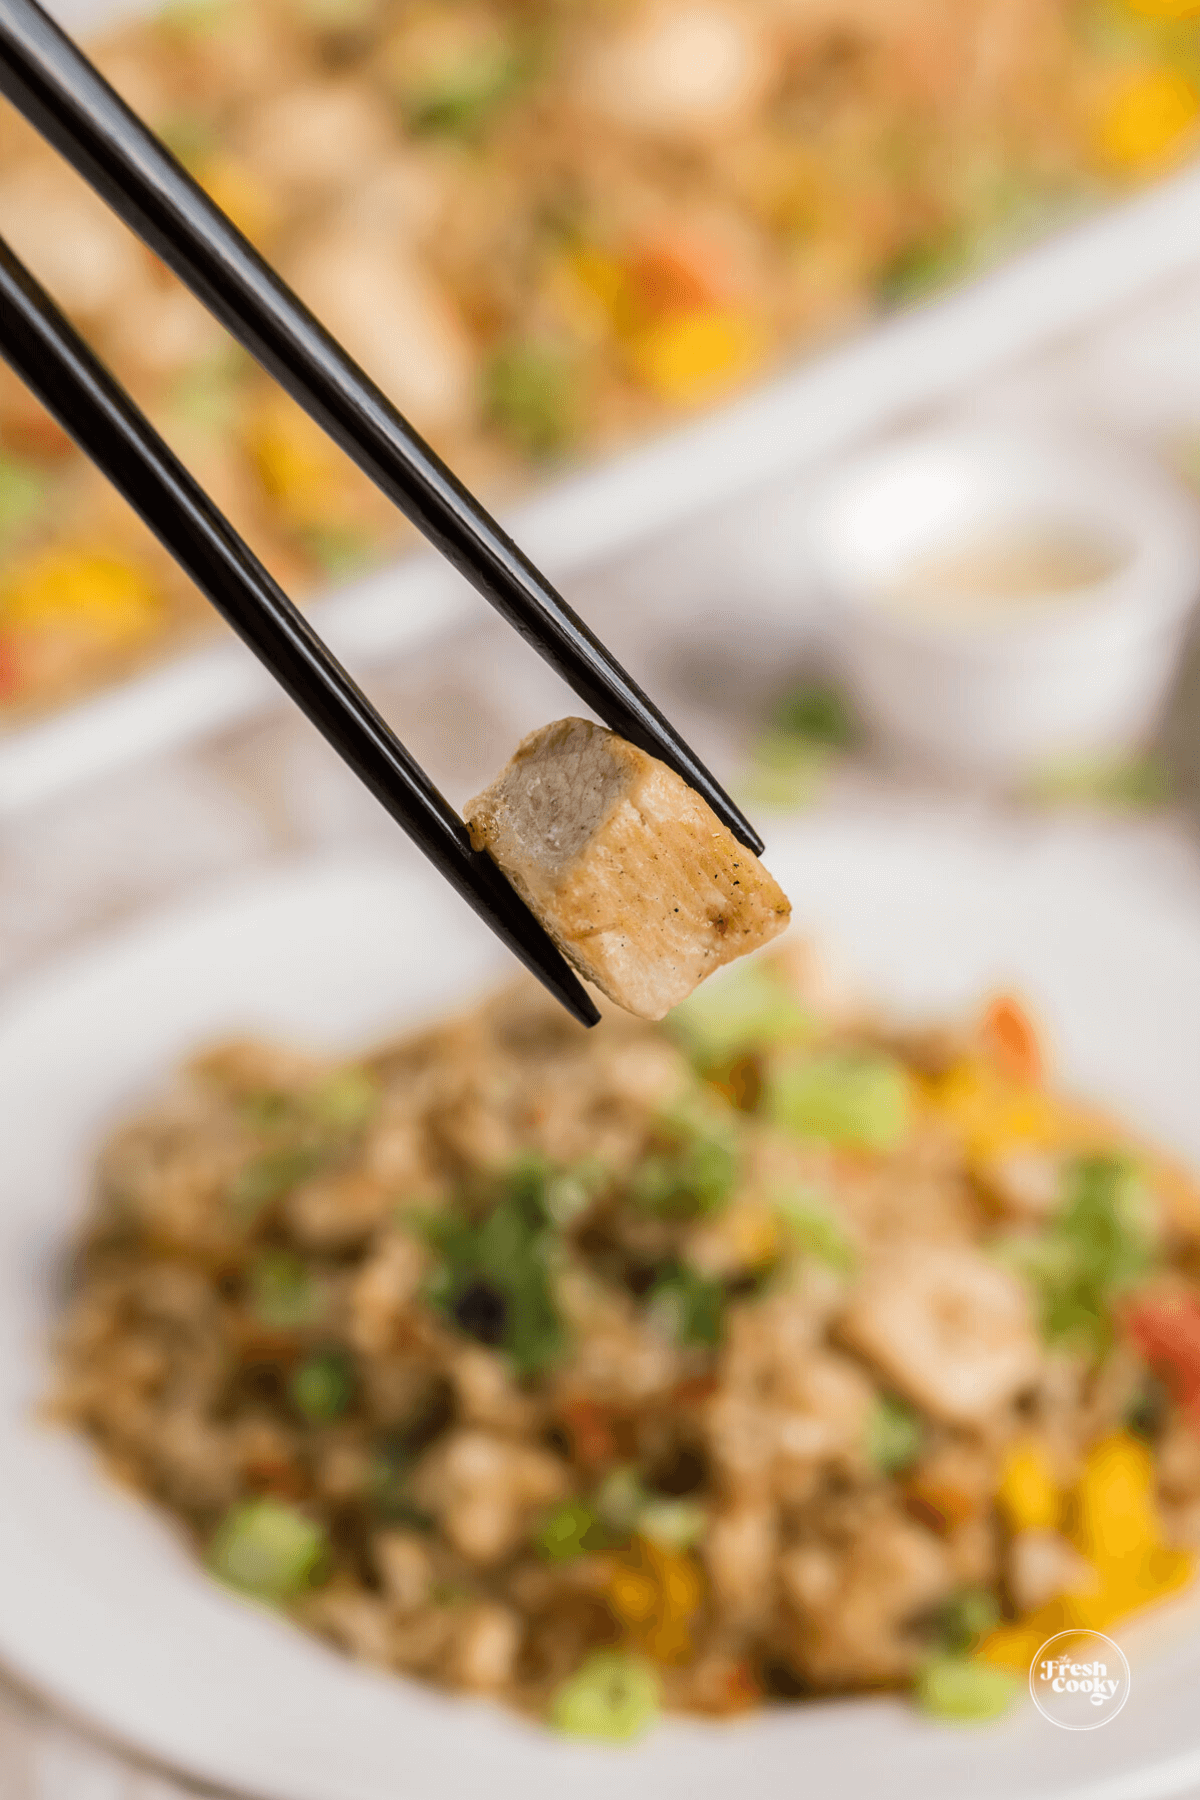 Chopsticks holding piece of chicken with fried rice in background.